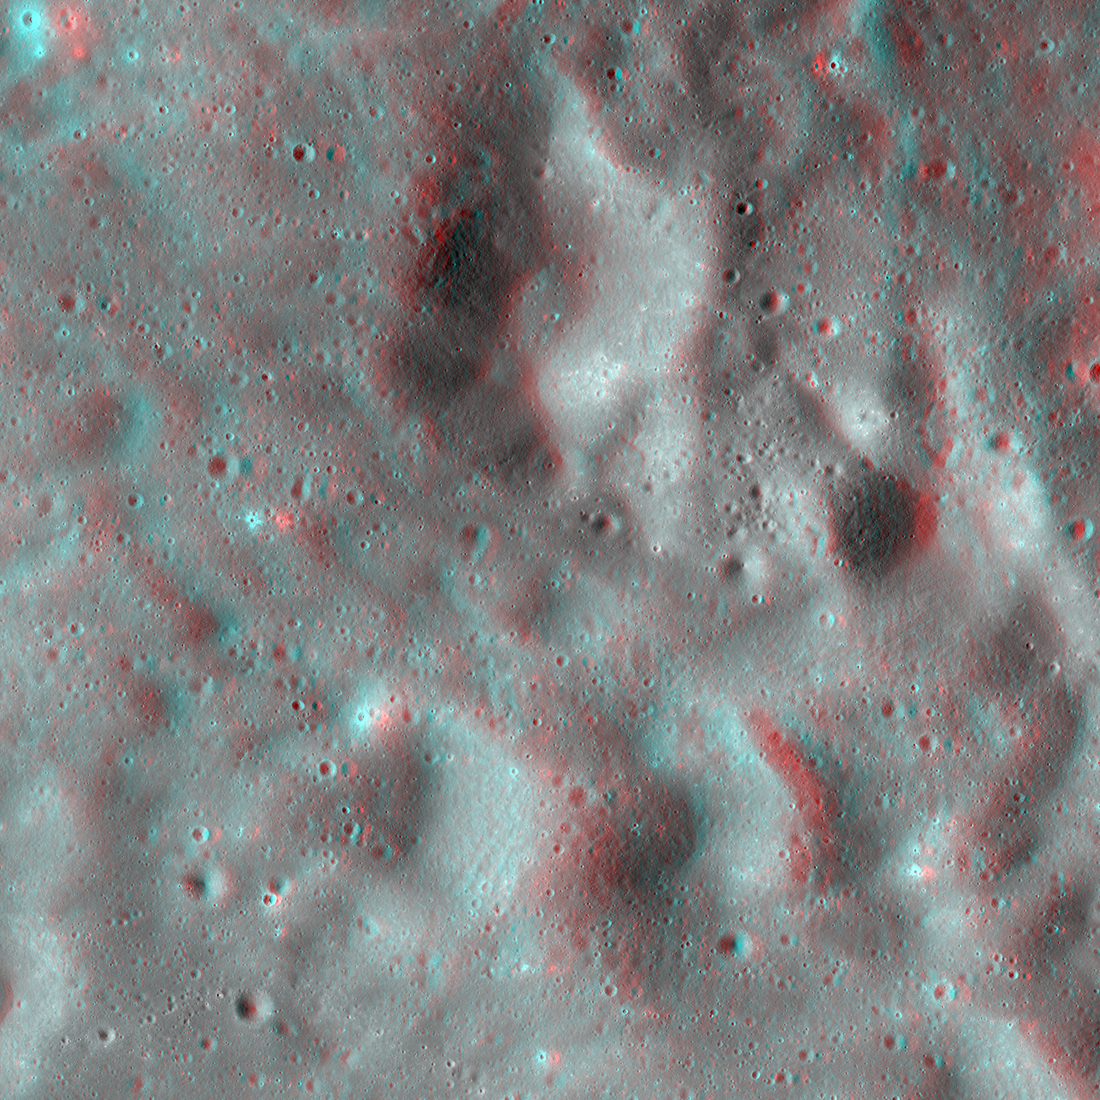 Content fi scaled nac anaglyph m182123981 m182109685